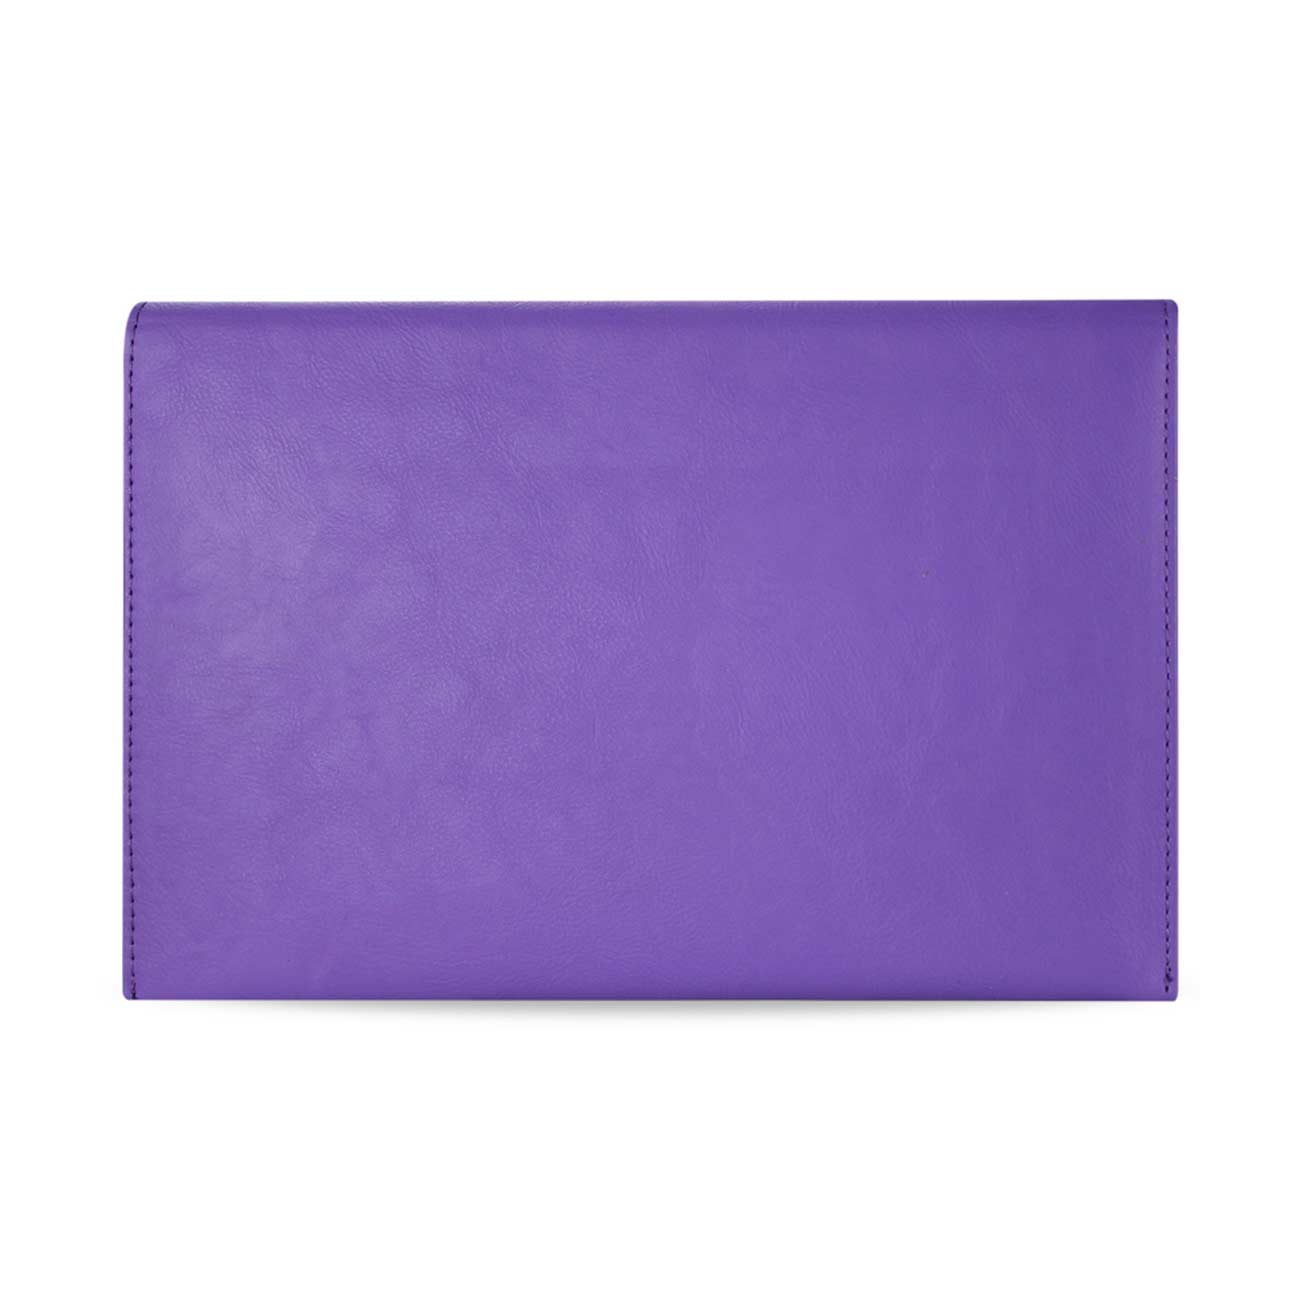 REIKO PREMIUM LEATHER CASE POUCH FOR 8.9INCHES IPADS AND TABLETS In PURPLE